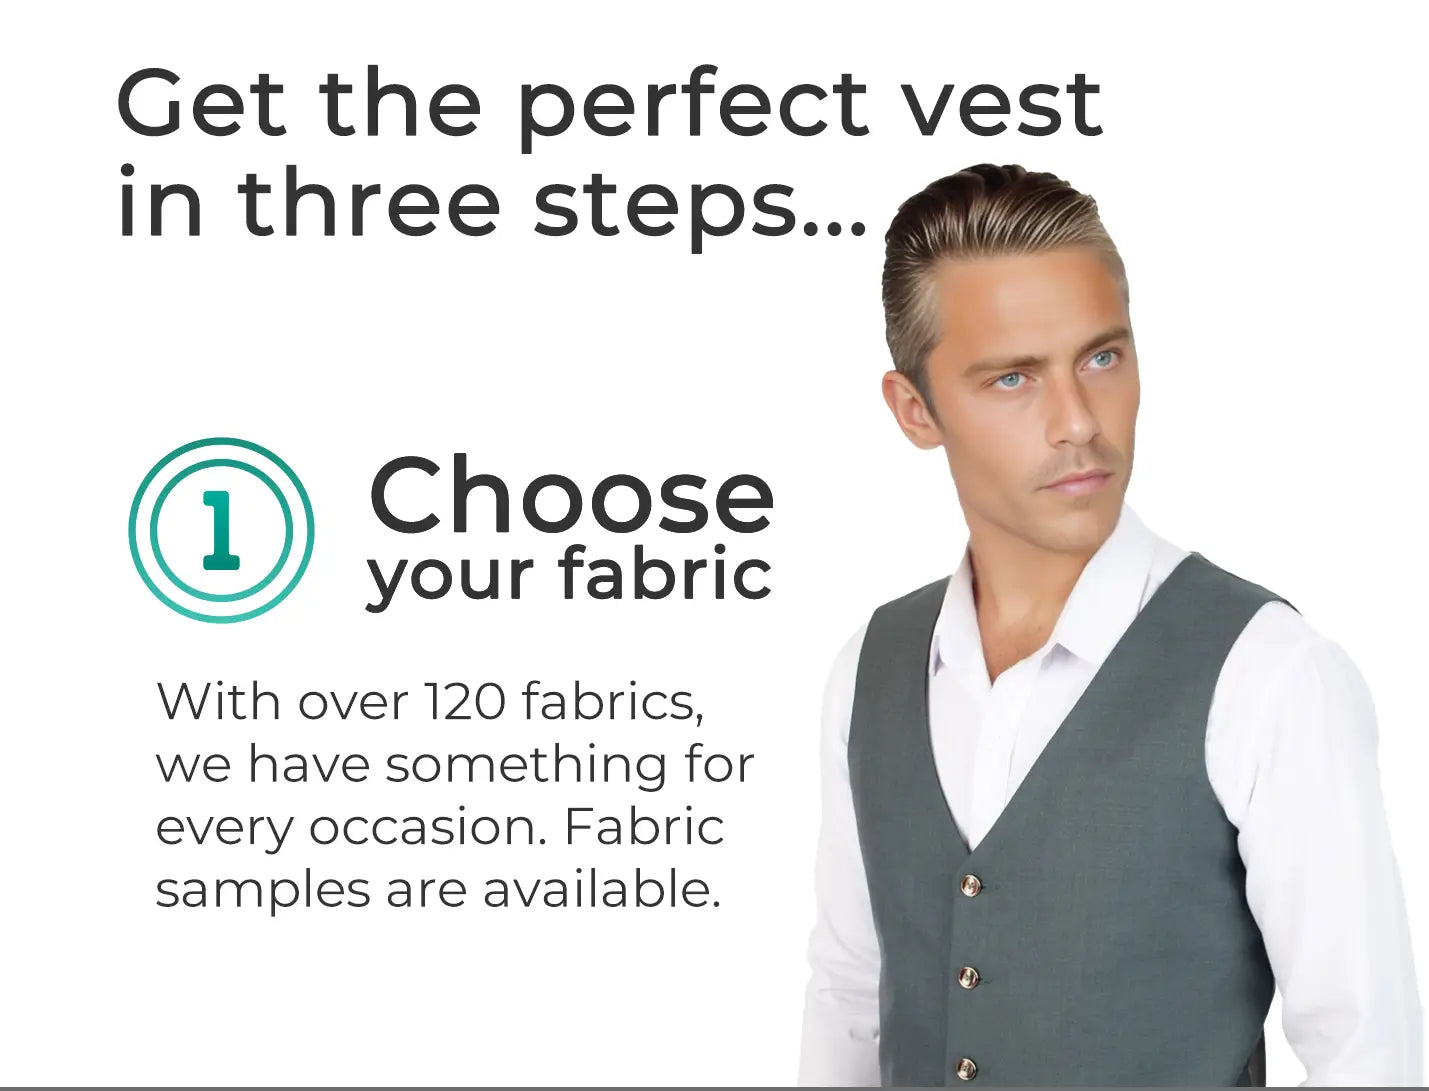 Get the perfect vest in three steps... choose your fabric. With over 120 fabrics, we have something for every occasion. Fabric samples are available. Man in vest.